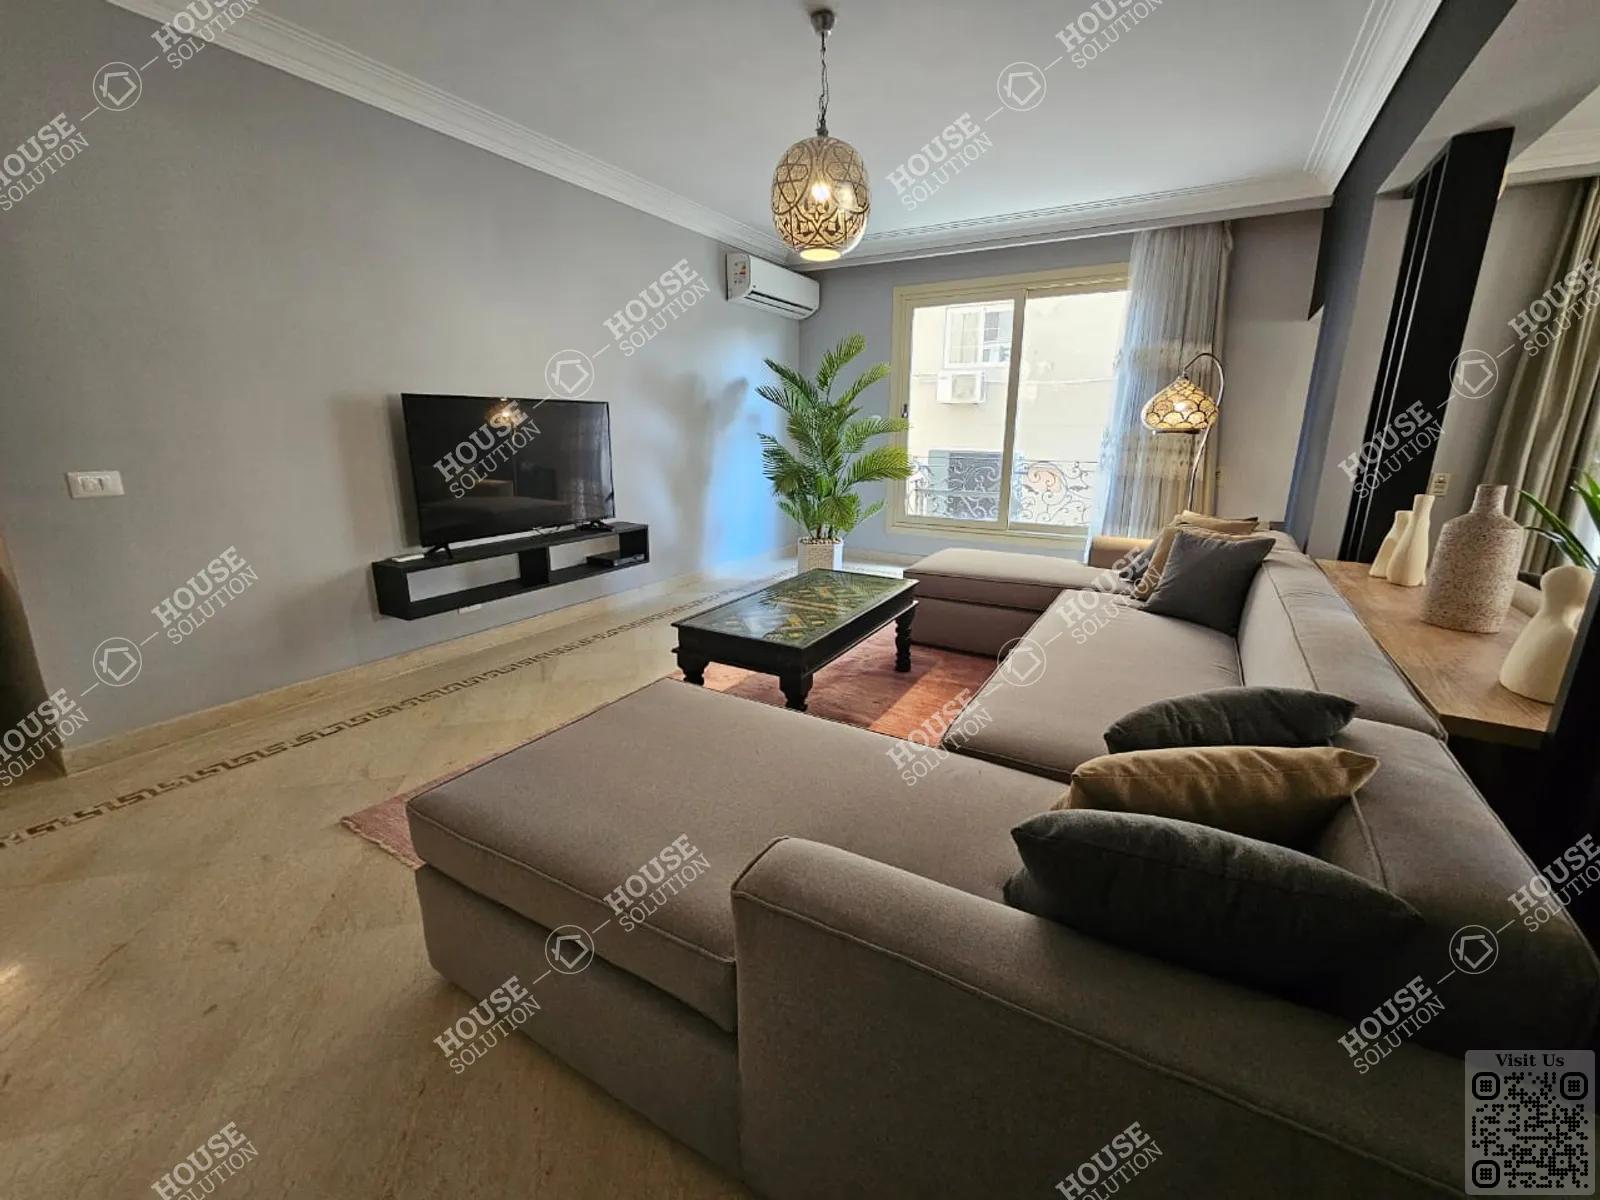 LIVING AREA  @ Apartments For Rent In Maadi Maadi Sarayat Area: 320 m² consists of 4 Bedrooms 3 Bathrooms Modern furnished 5 stars #5817-2